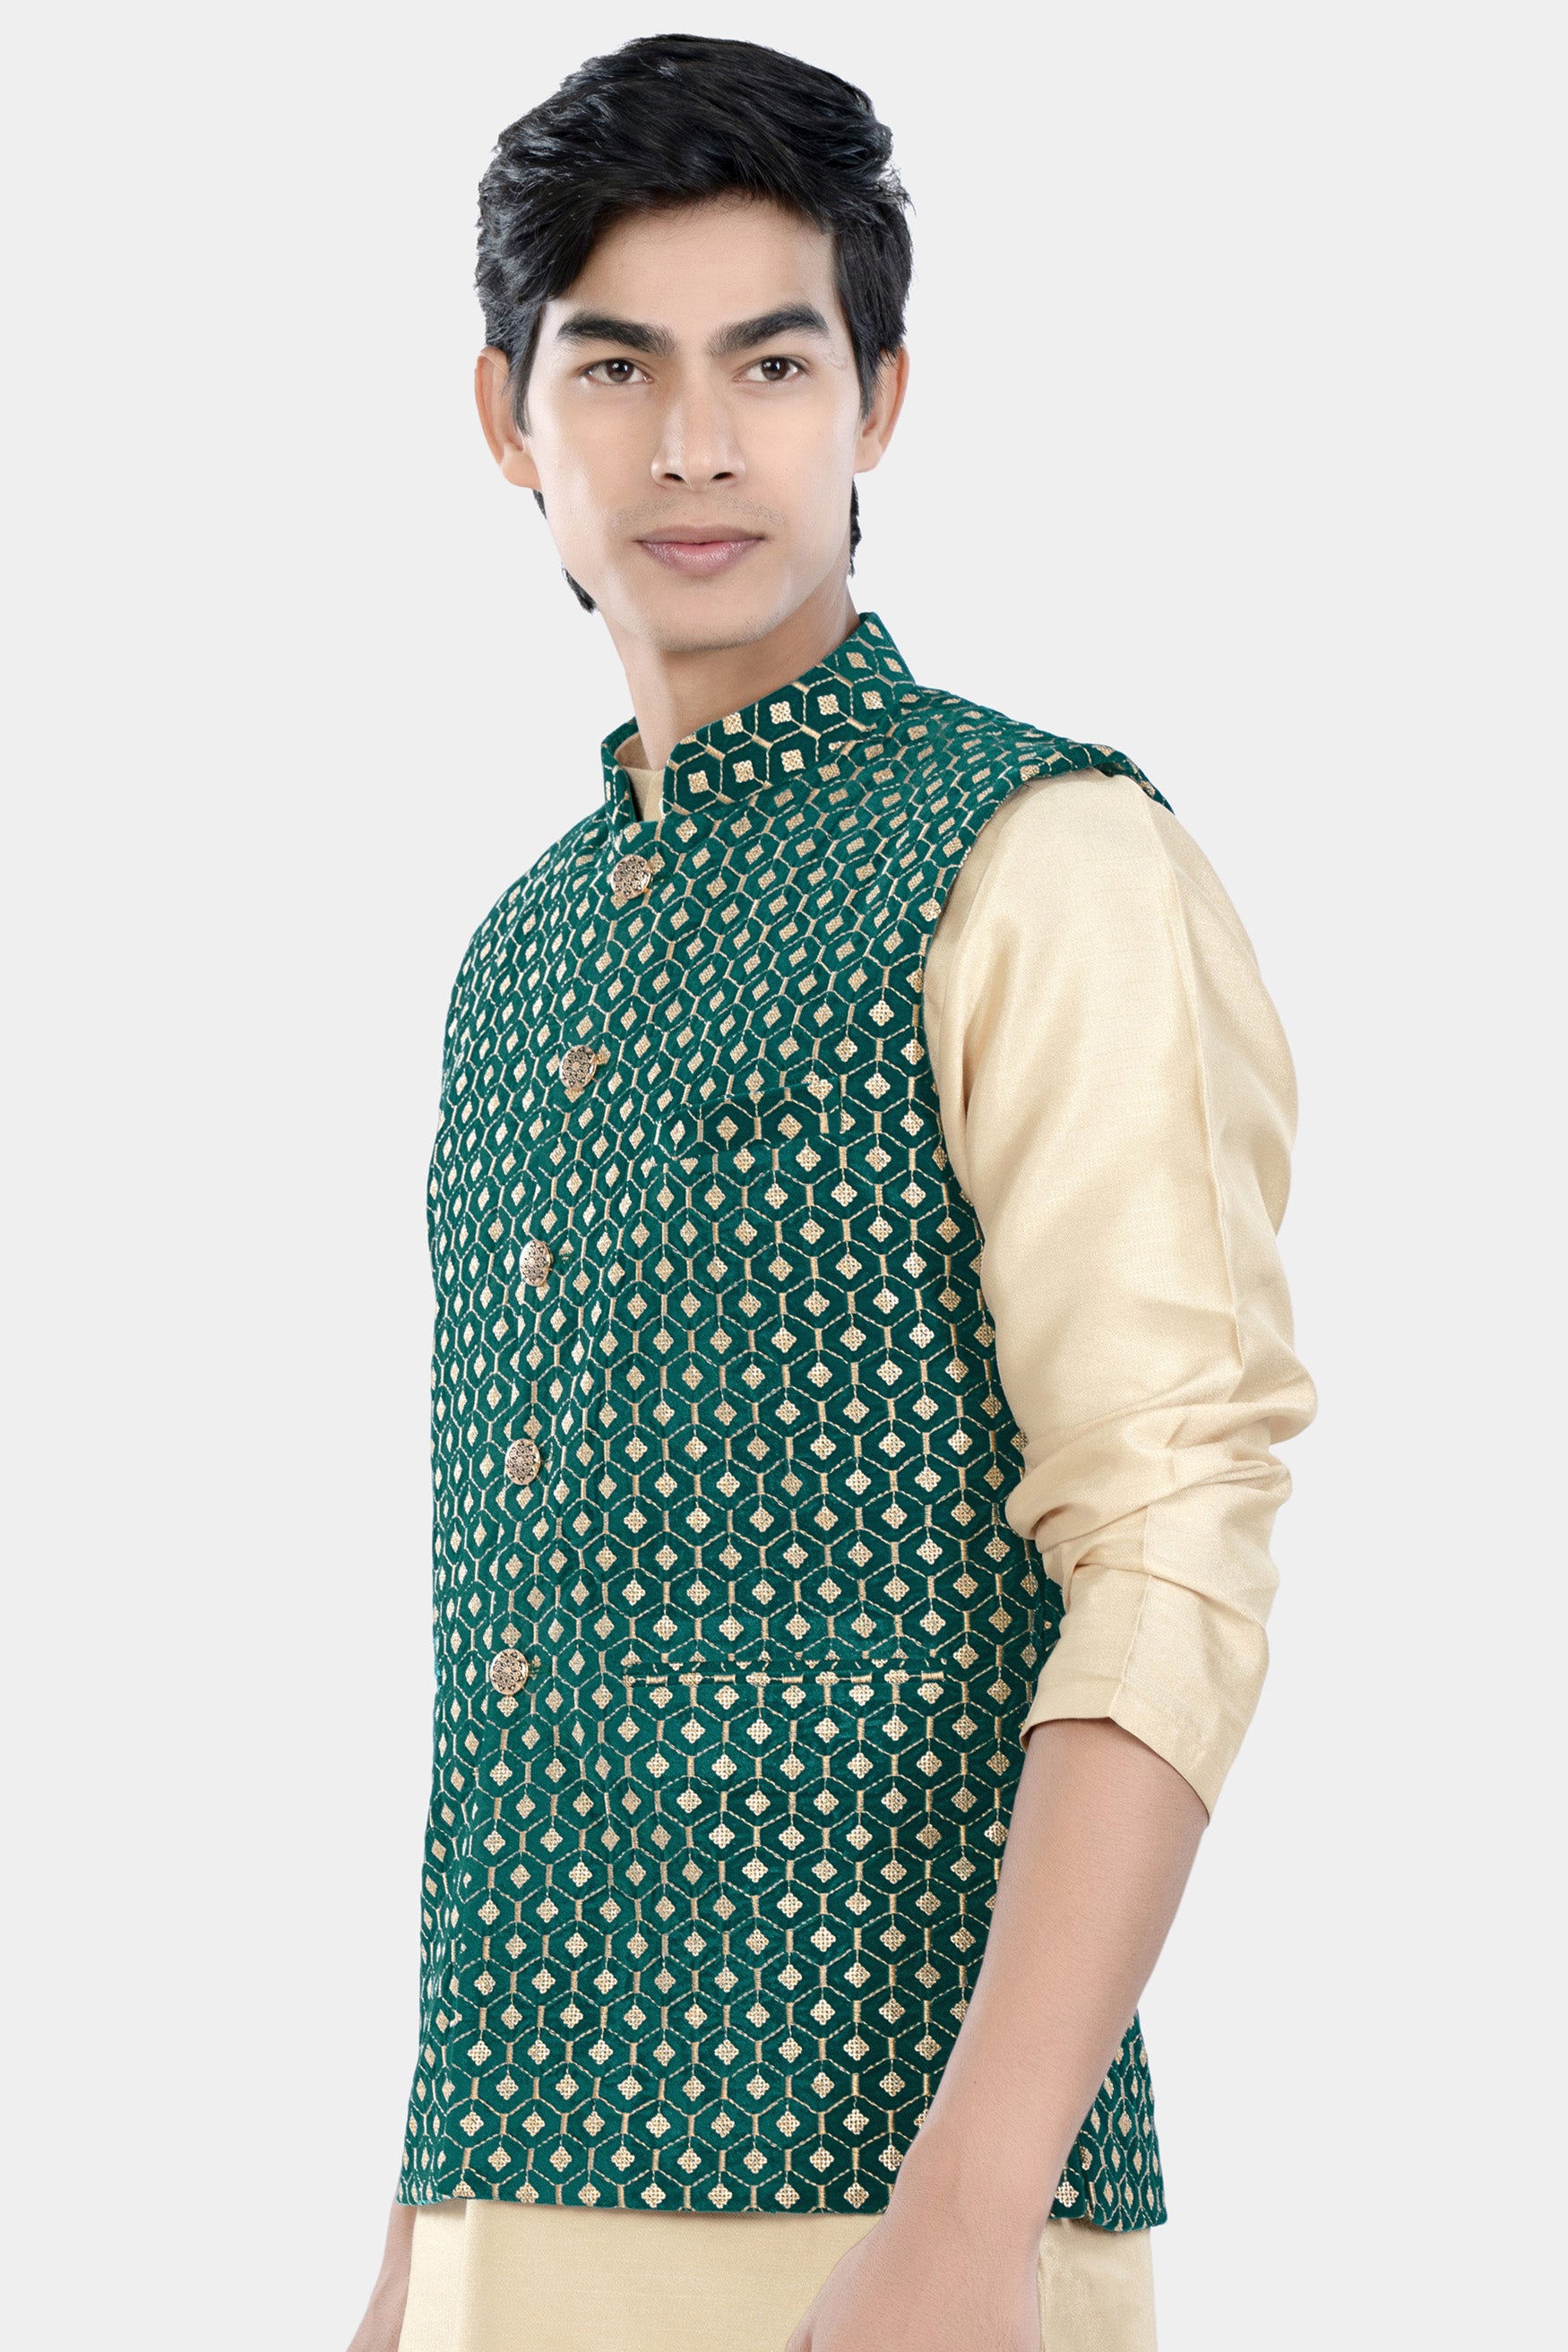 Sherpa Green and Givry Cream Hexagon Sequin and Thread Embroidered Designer Nehru Jacket